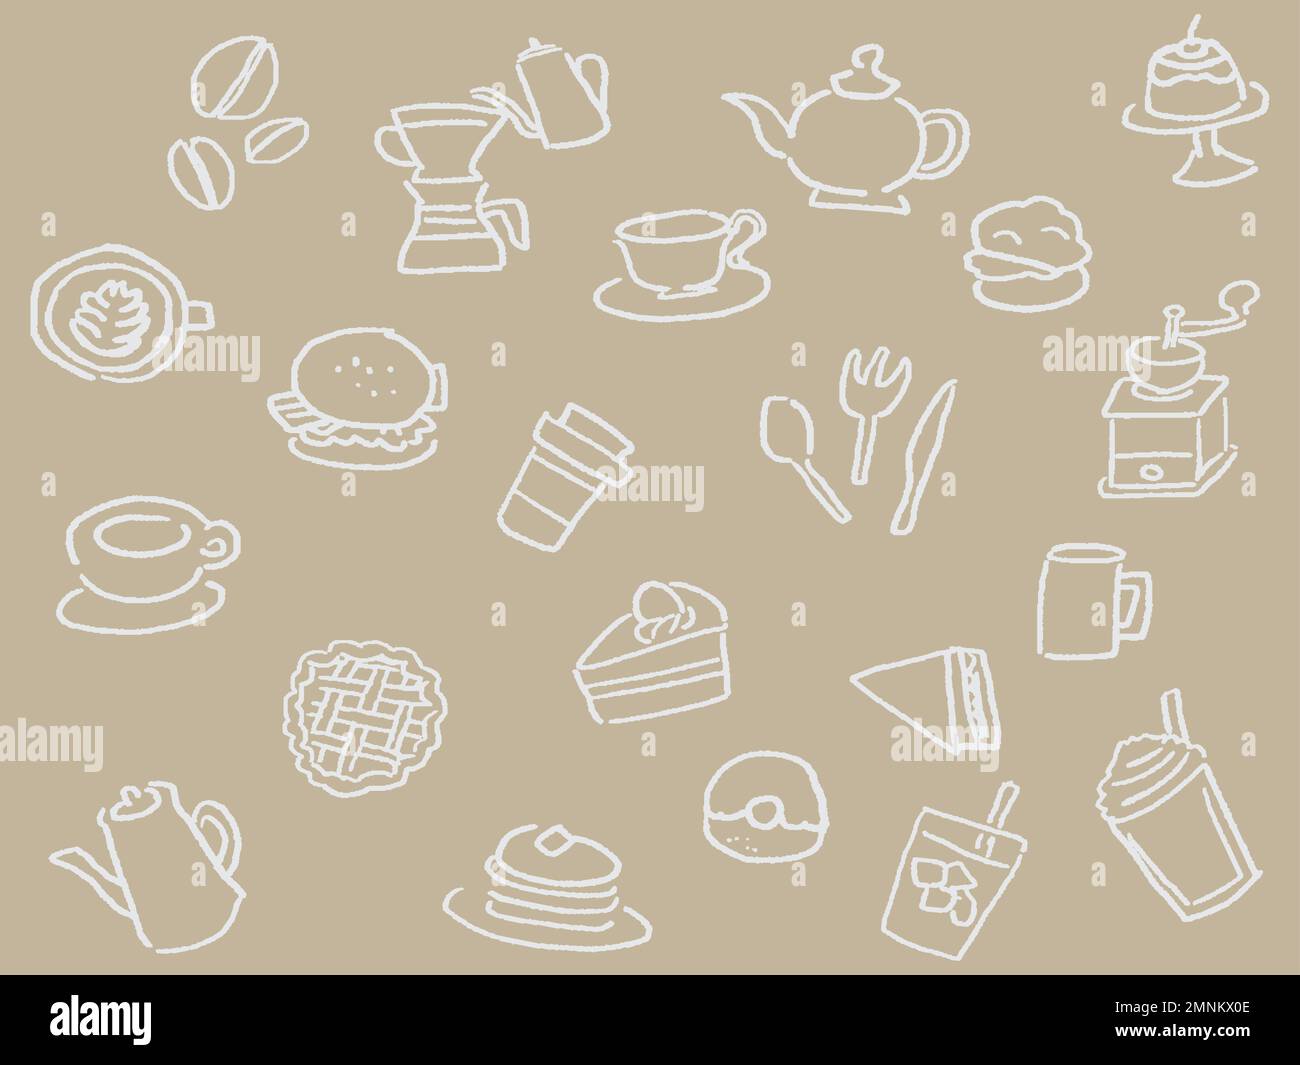 Cafe line drawing icon set.  White outline on light brown background.   Line drawings of various sweets and coffee Stock Vector